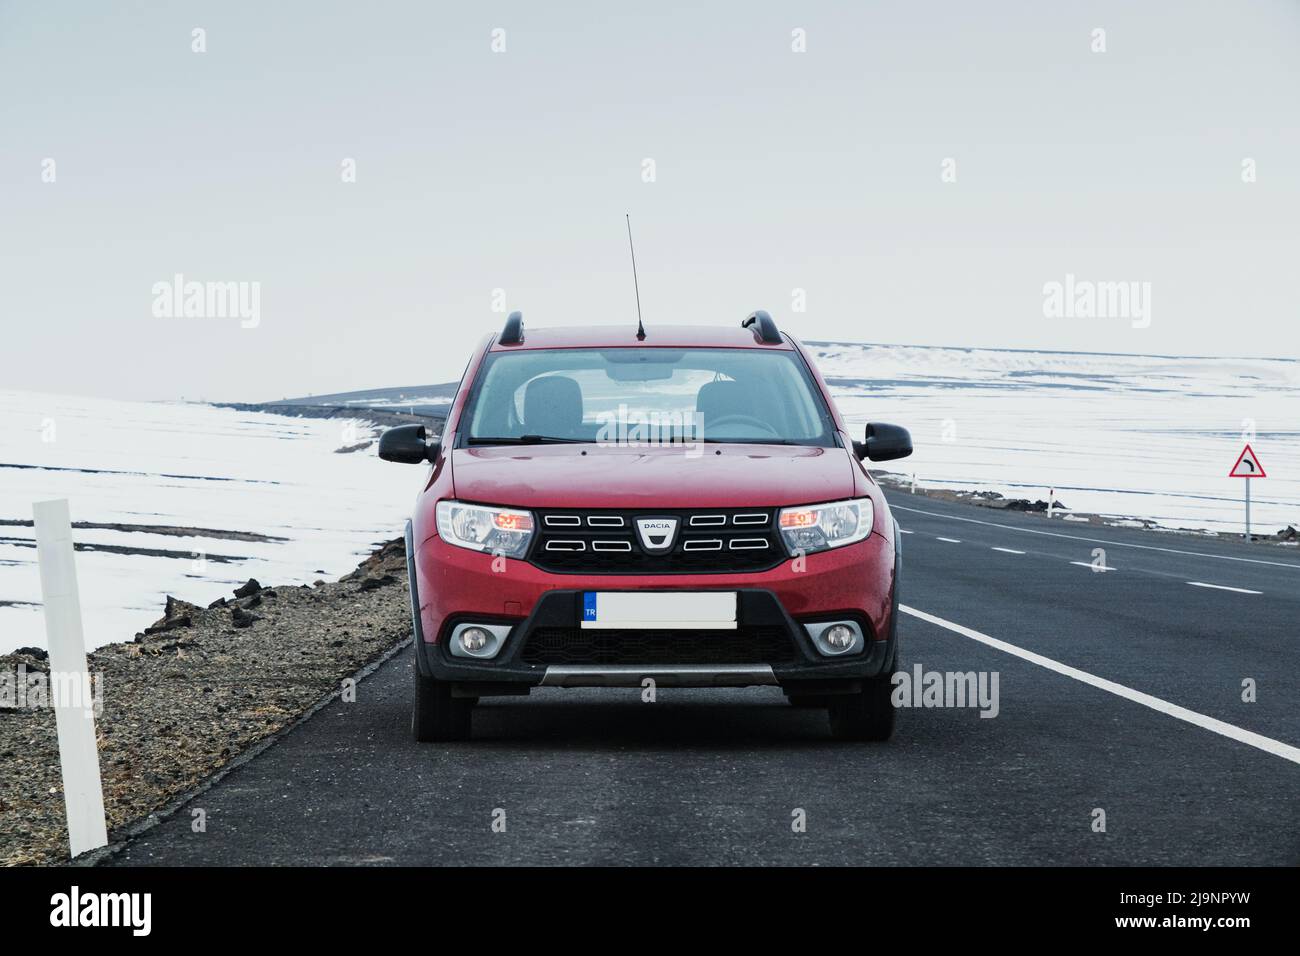 Kars, Turkey - February 25, 2022: Front view of a red colored Dacia brand Sandero model car paused on an asphalt road with a snowy background. Stock Photo